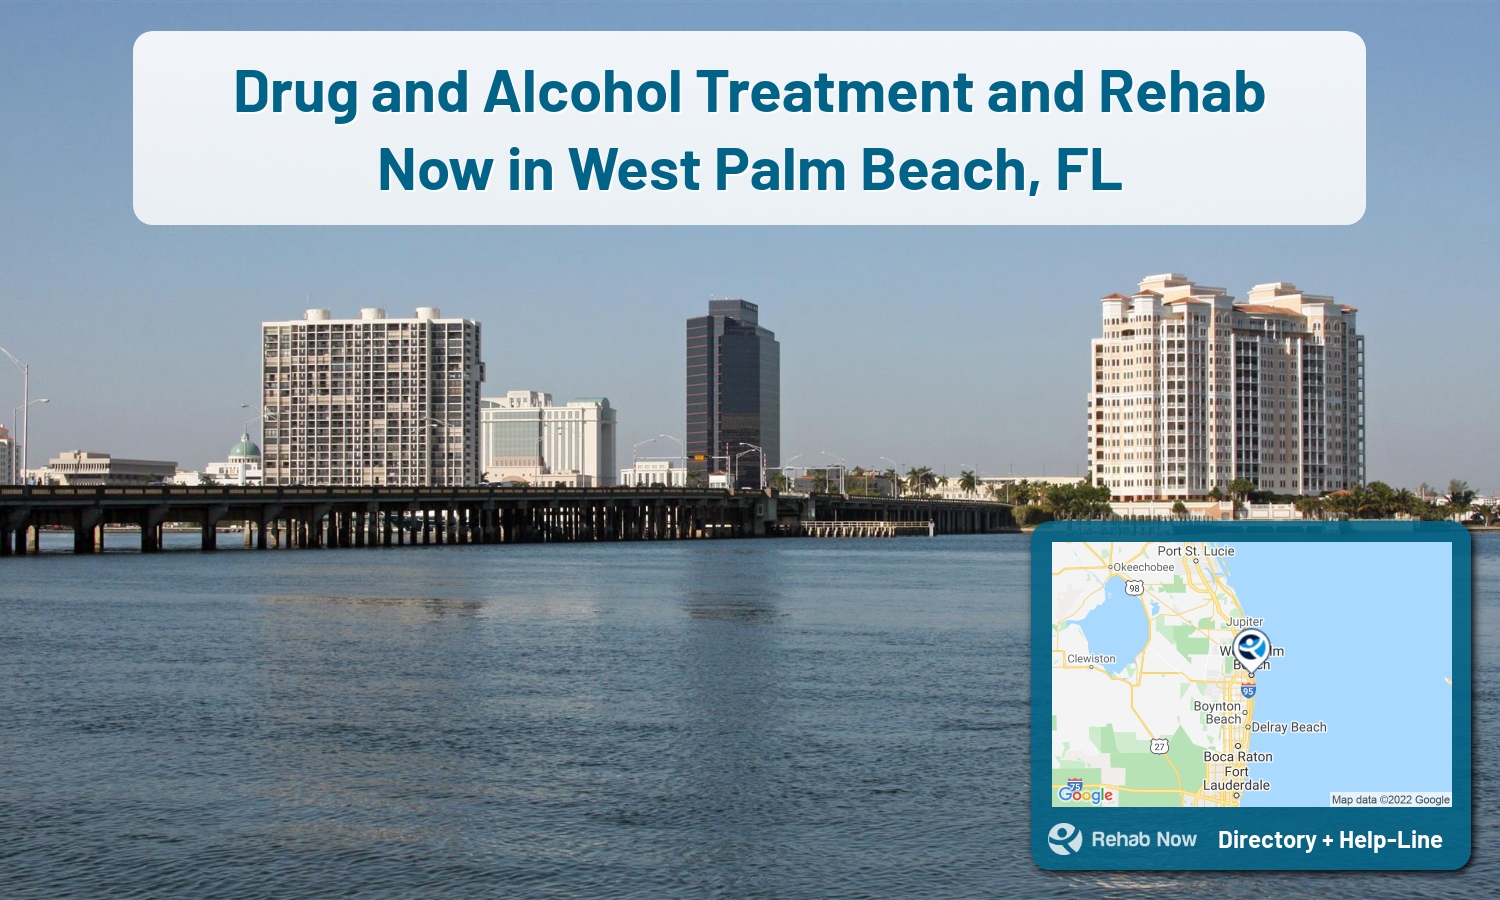 West Palm Beach, FL Treatment Centers. Find drug rehab in West Palm Beach, Florida, or detox and treatment programs. Get the right help now!